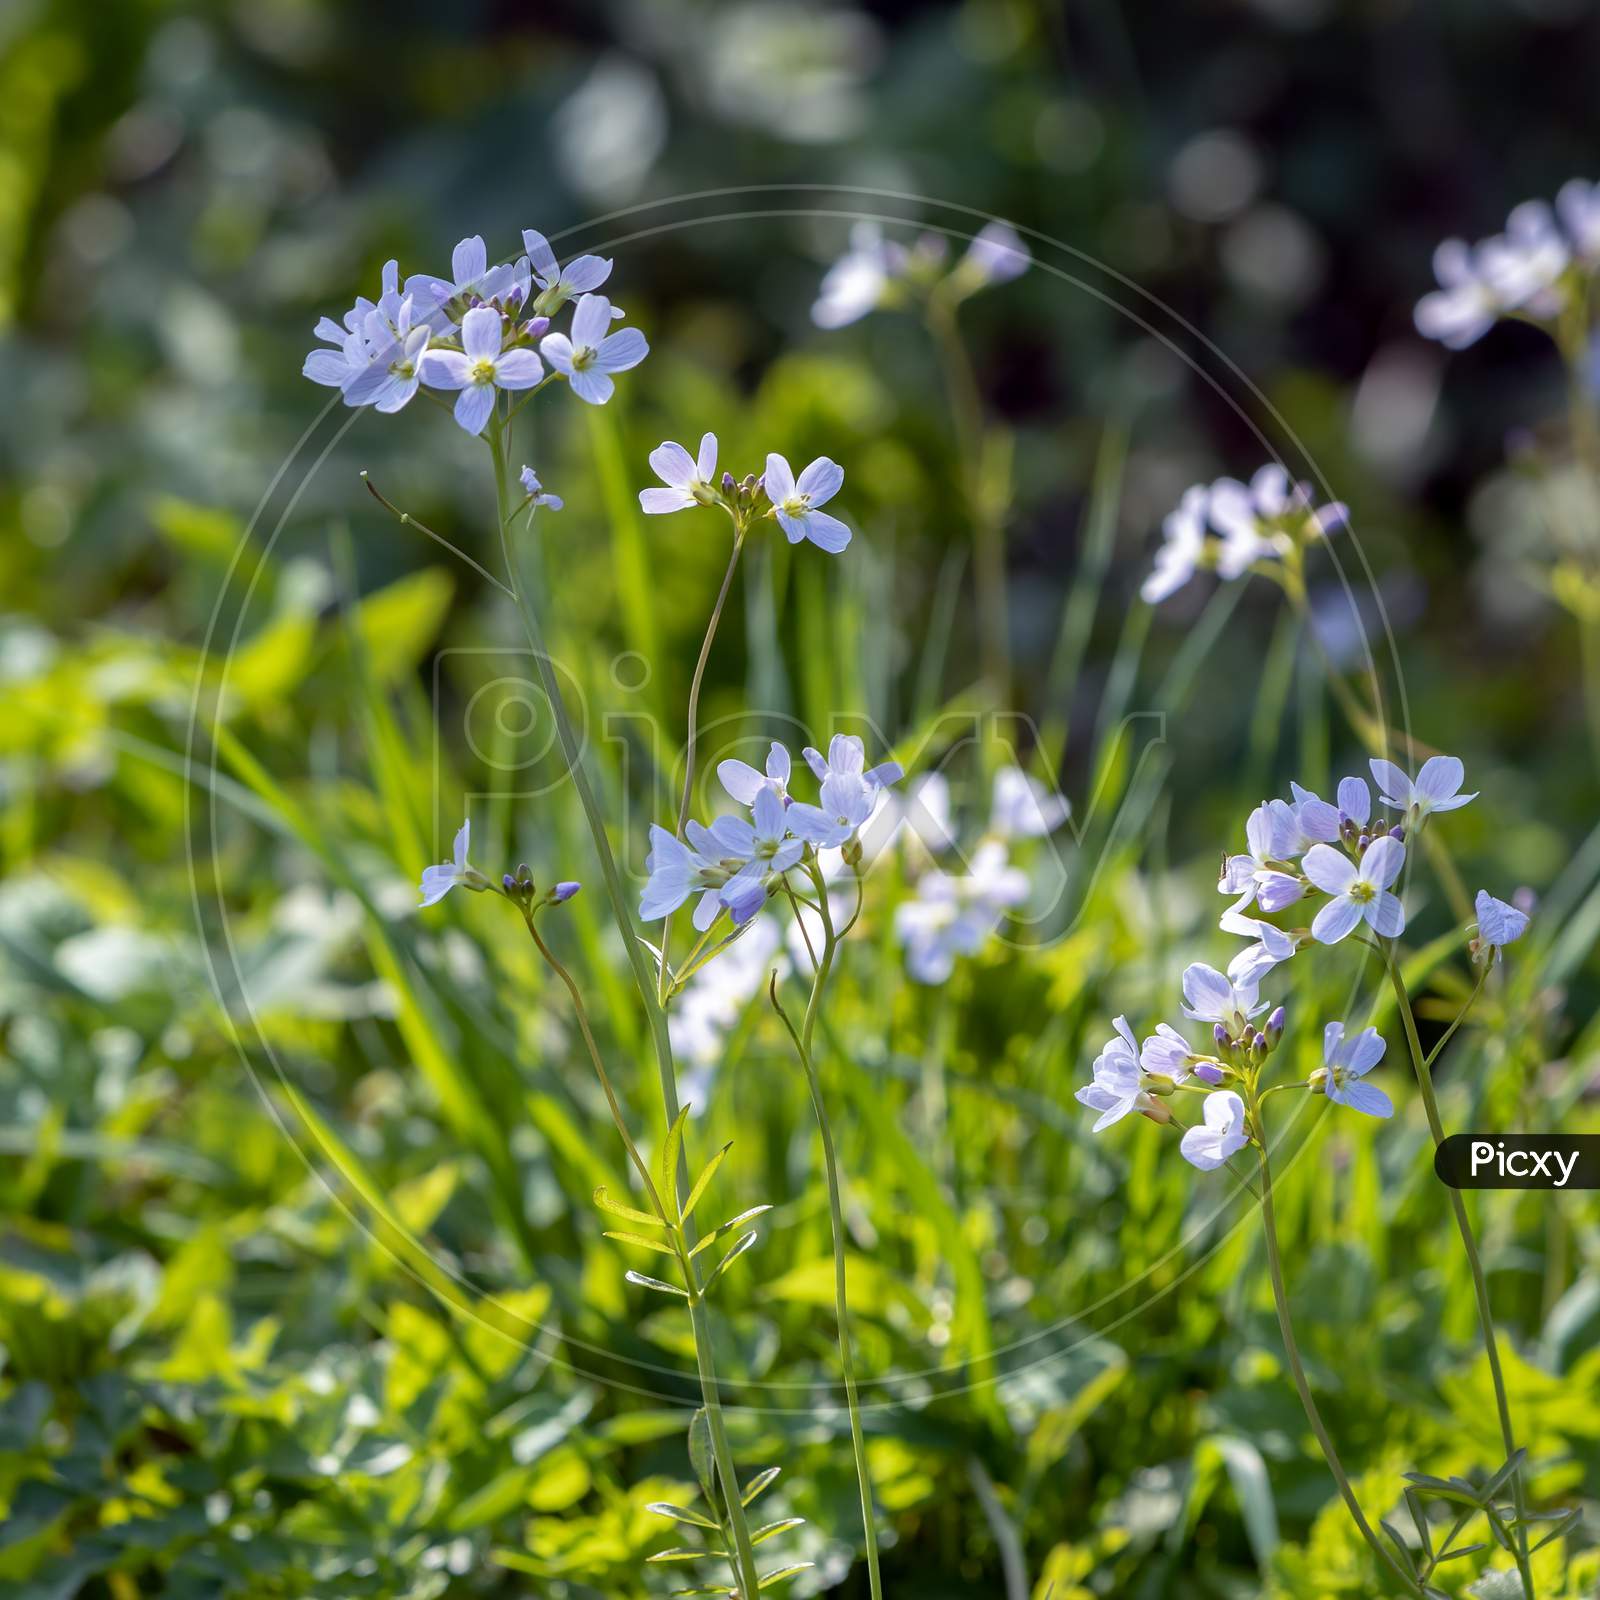 Cuckoo Flowers (Cardamine Pratensis) Flowering In The Spring Sunshine At Birch Grove In East Sussex